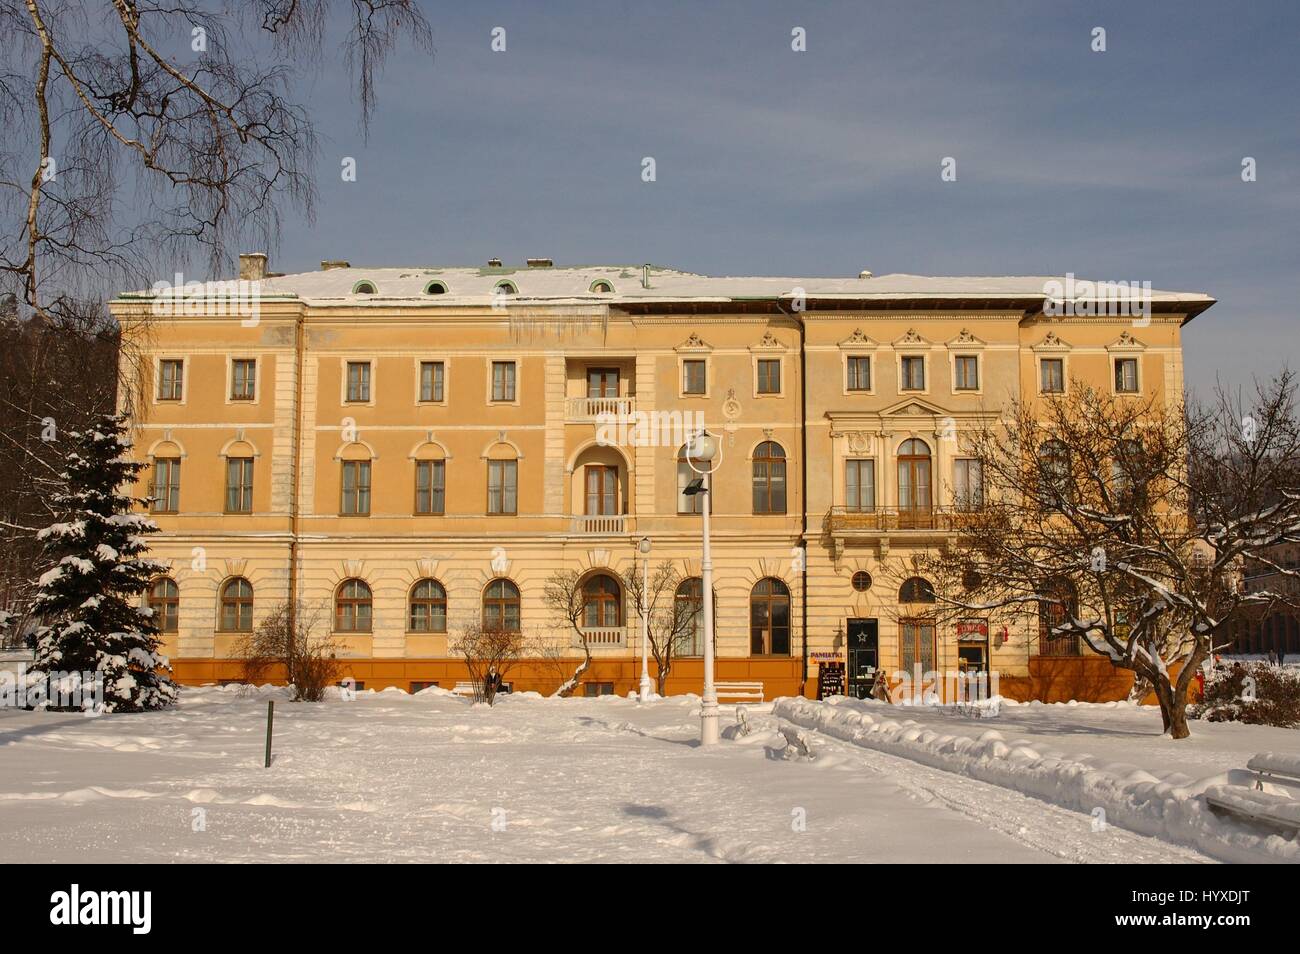 Poland, Krynica, The Old Spa House Stock Photo